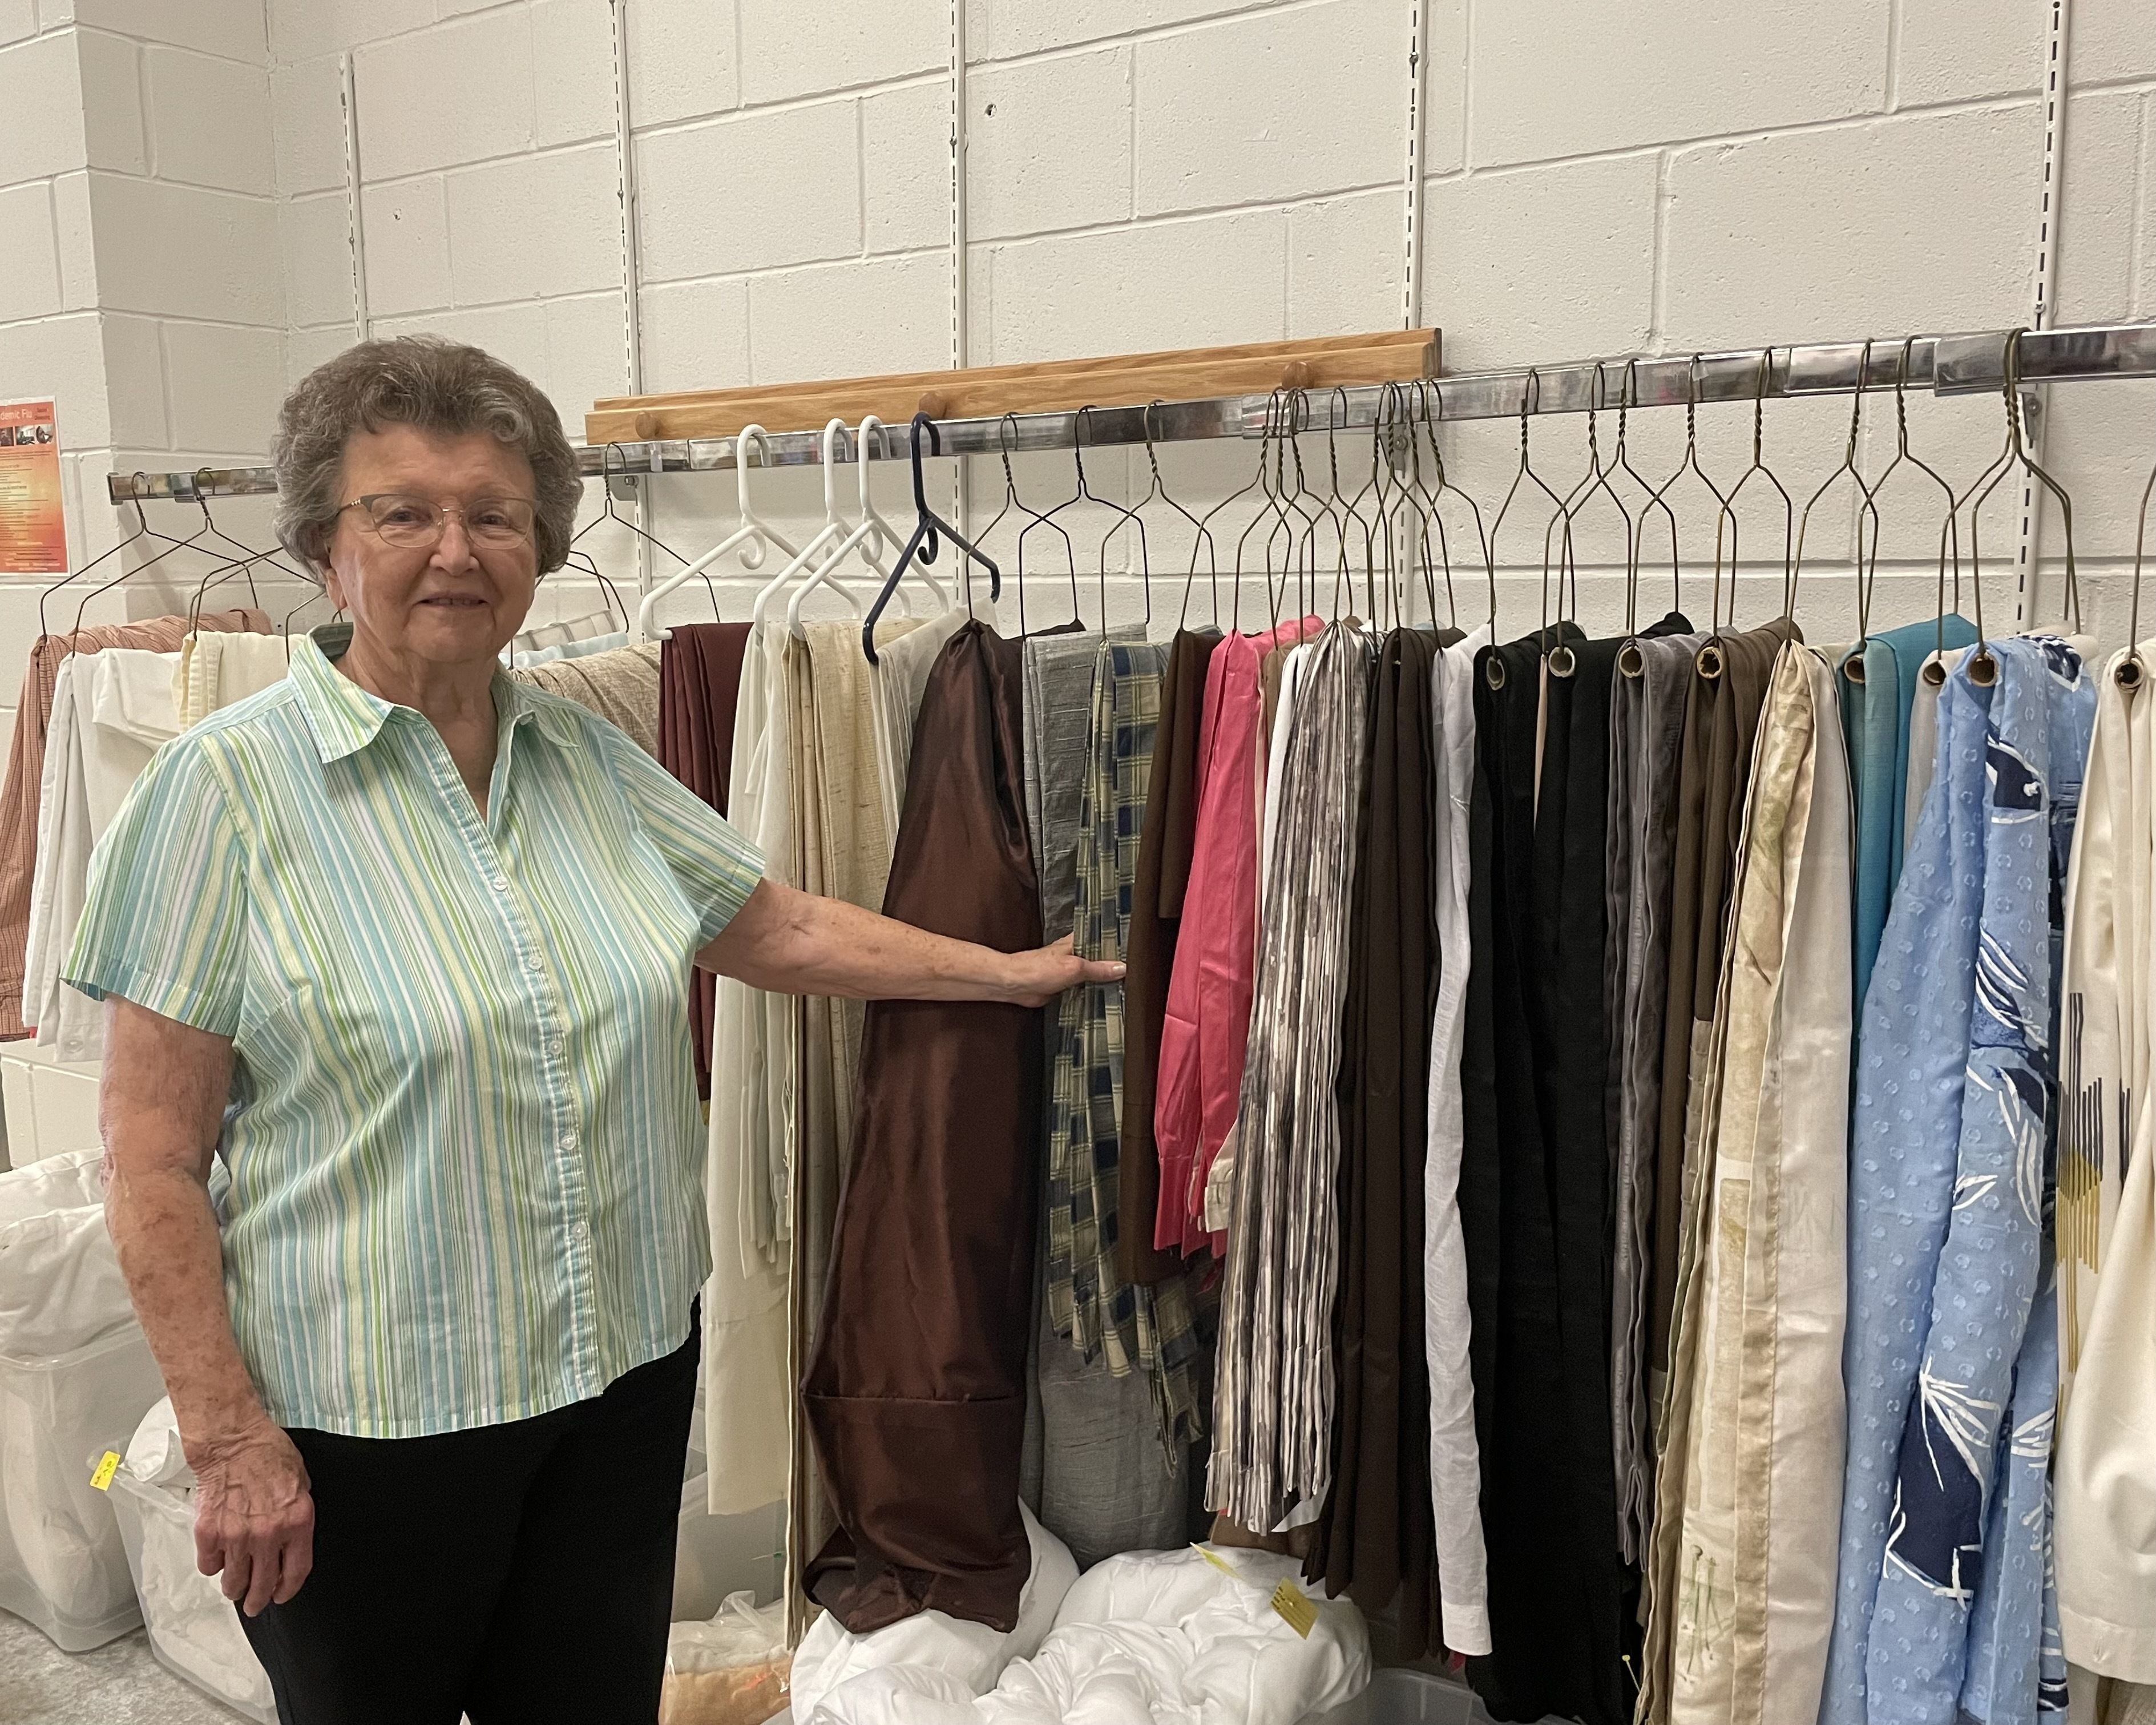 Joyce volunteers several days a week at the General Store Fort Dodge, sorting and pricing linens.